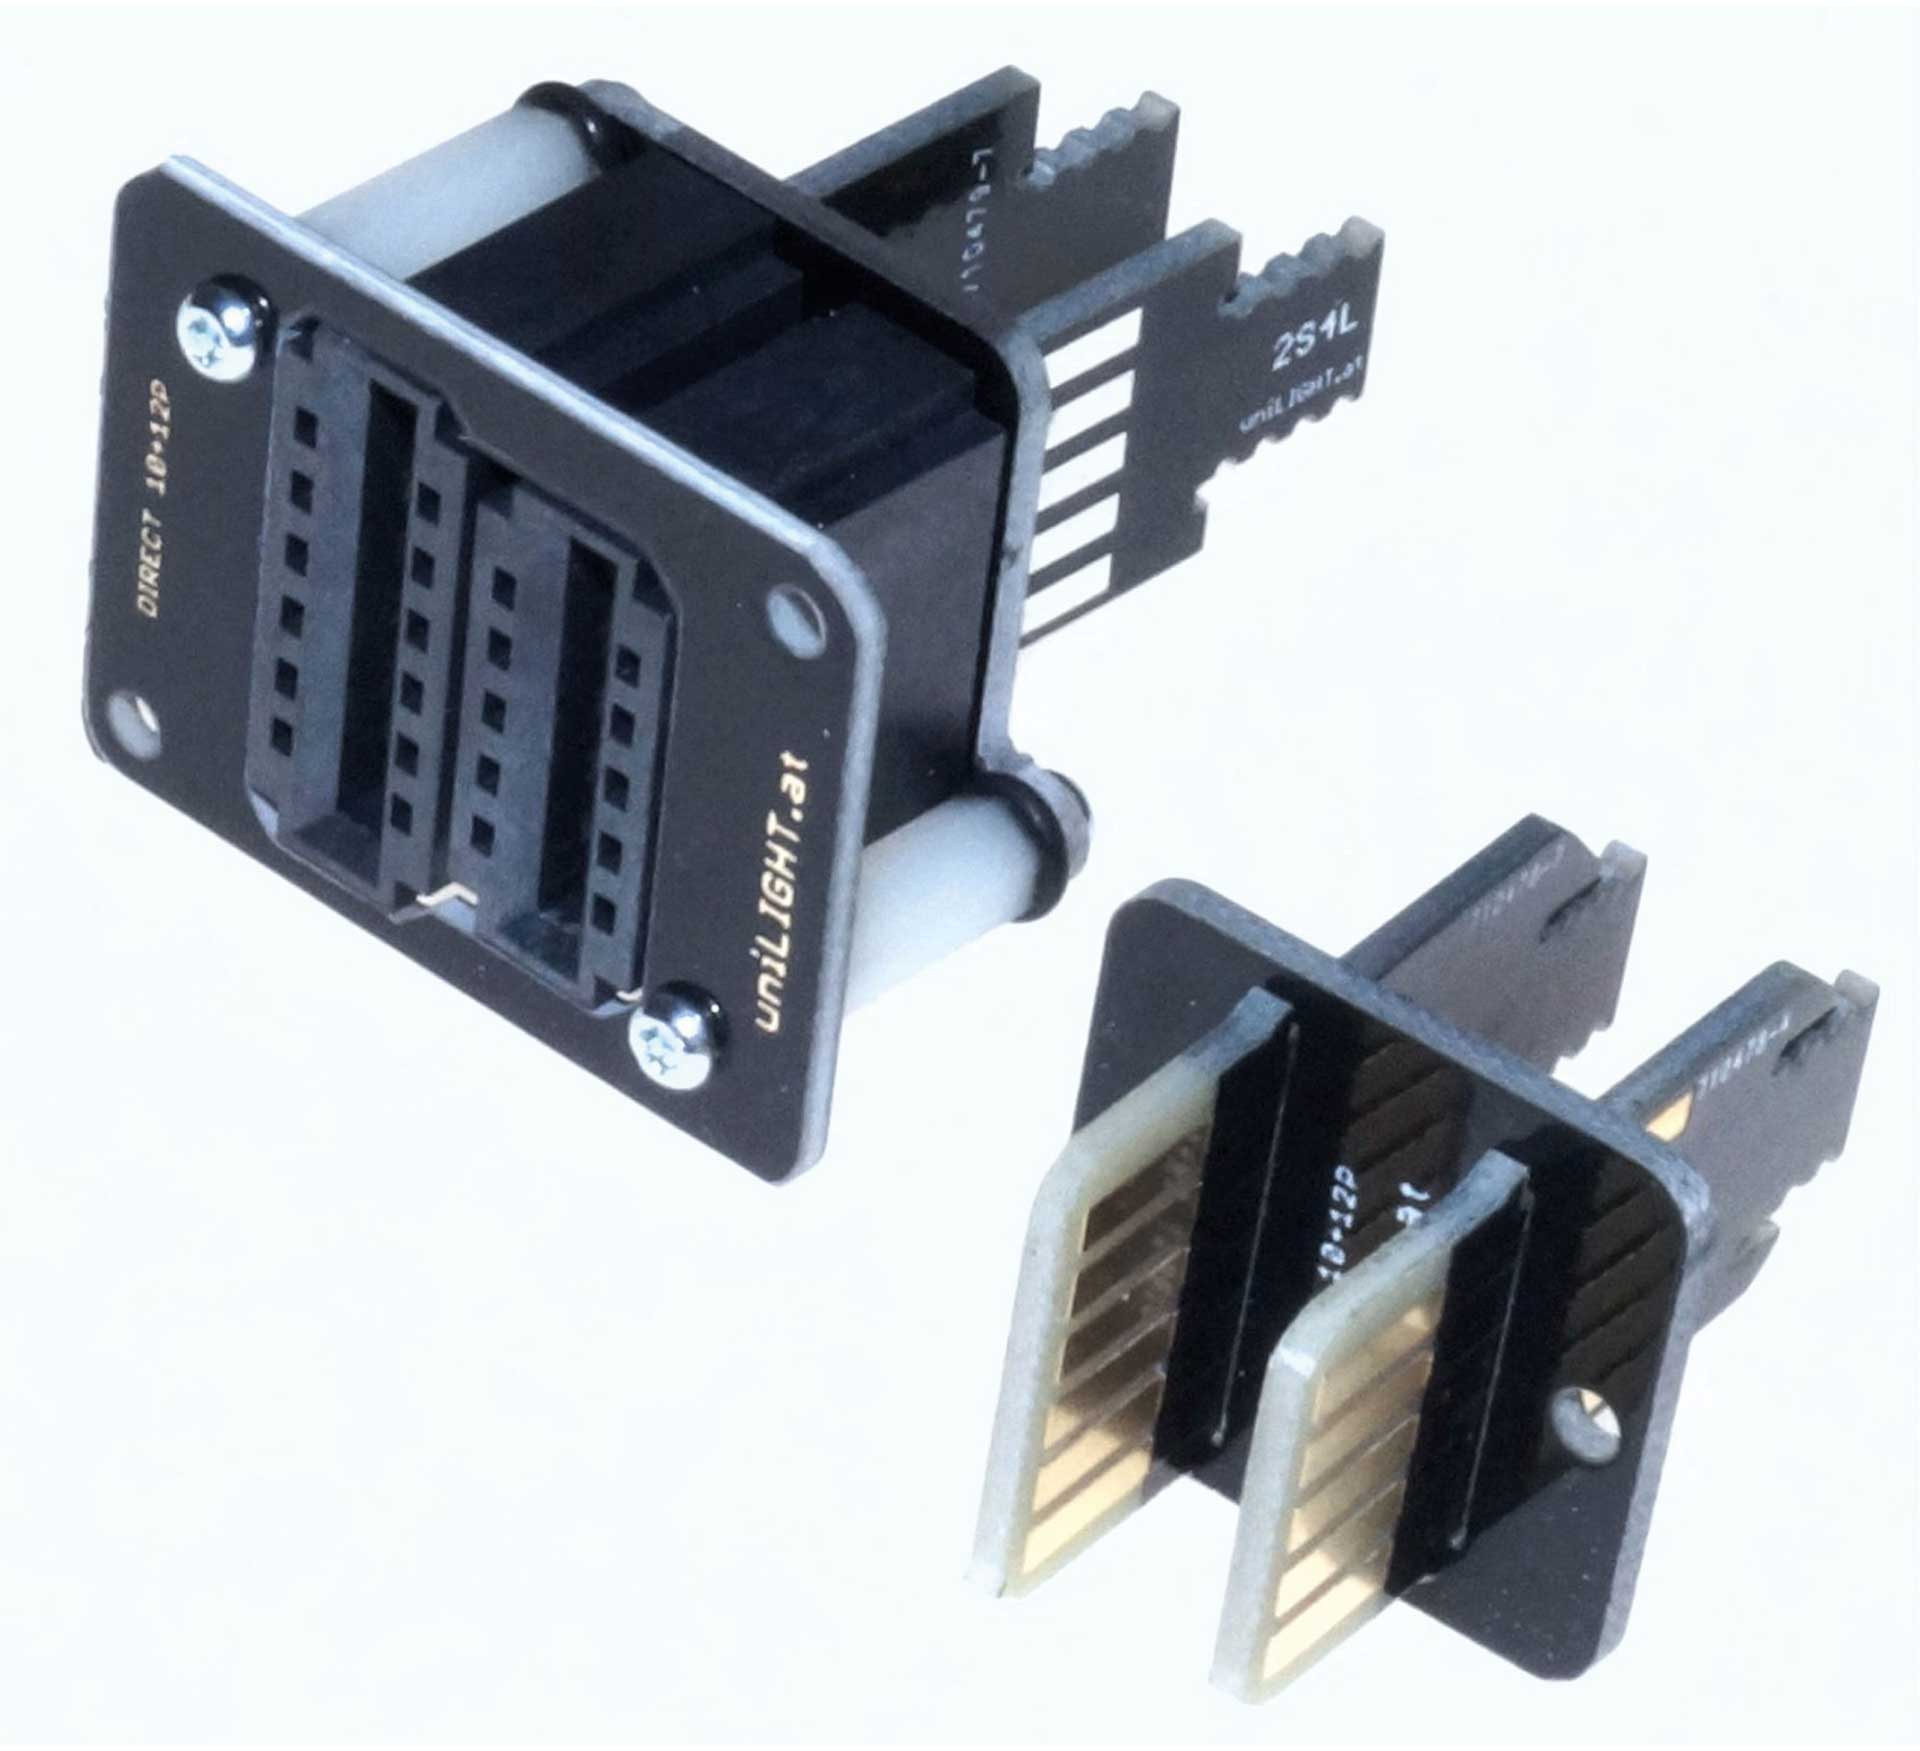 UNILIGHT DIRECT PLUG-IN CONNECTION DIRECT WITH 6 PRIMARY AND 10 SECONDARY POLES FOR 2 SERVOS AND 10 POLES FOR LIGHTS AND SO